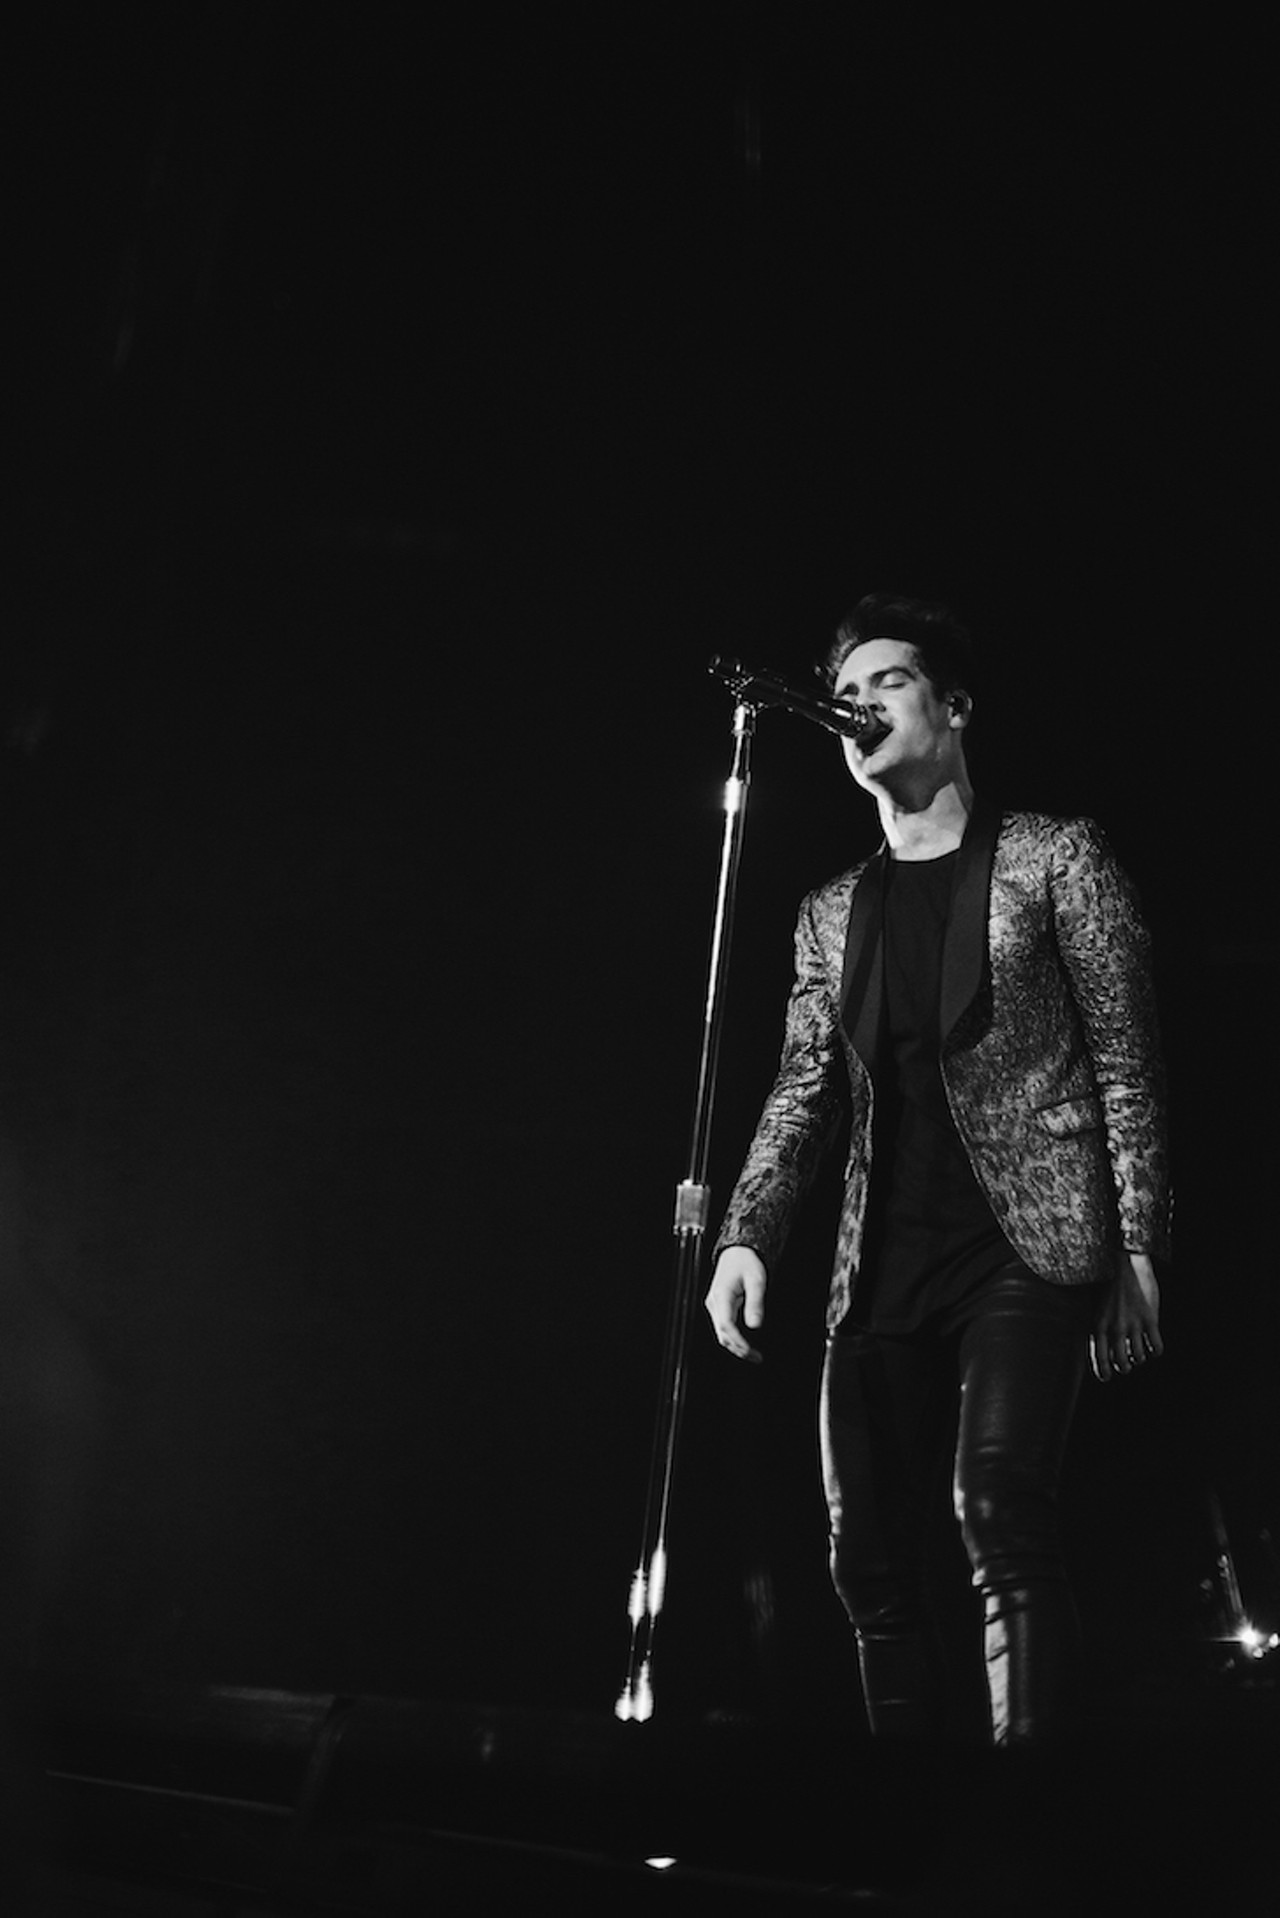 Photos from Panic at the Disco, Saint Motel, Misterwives at the Amway Center